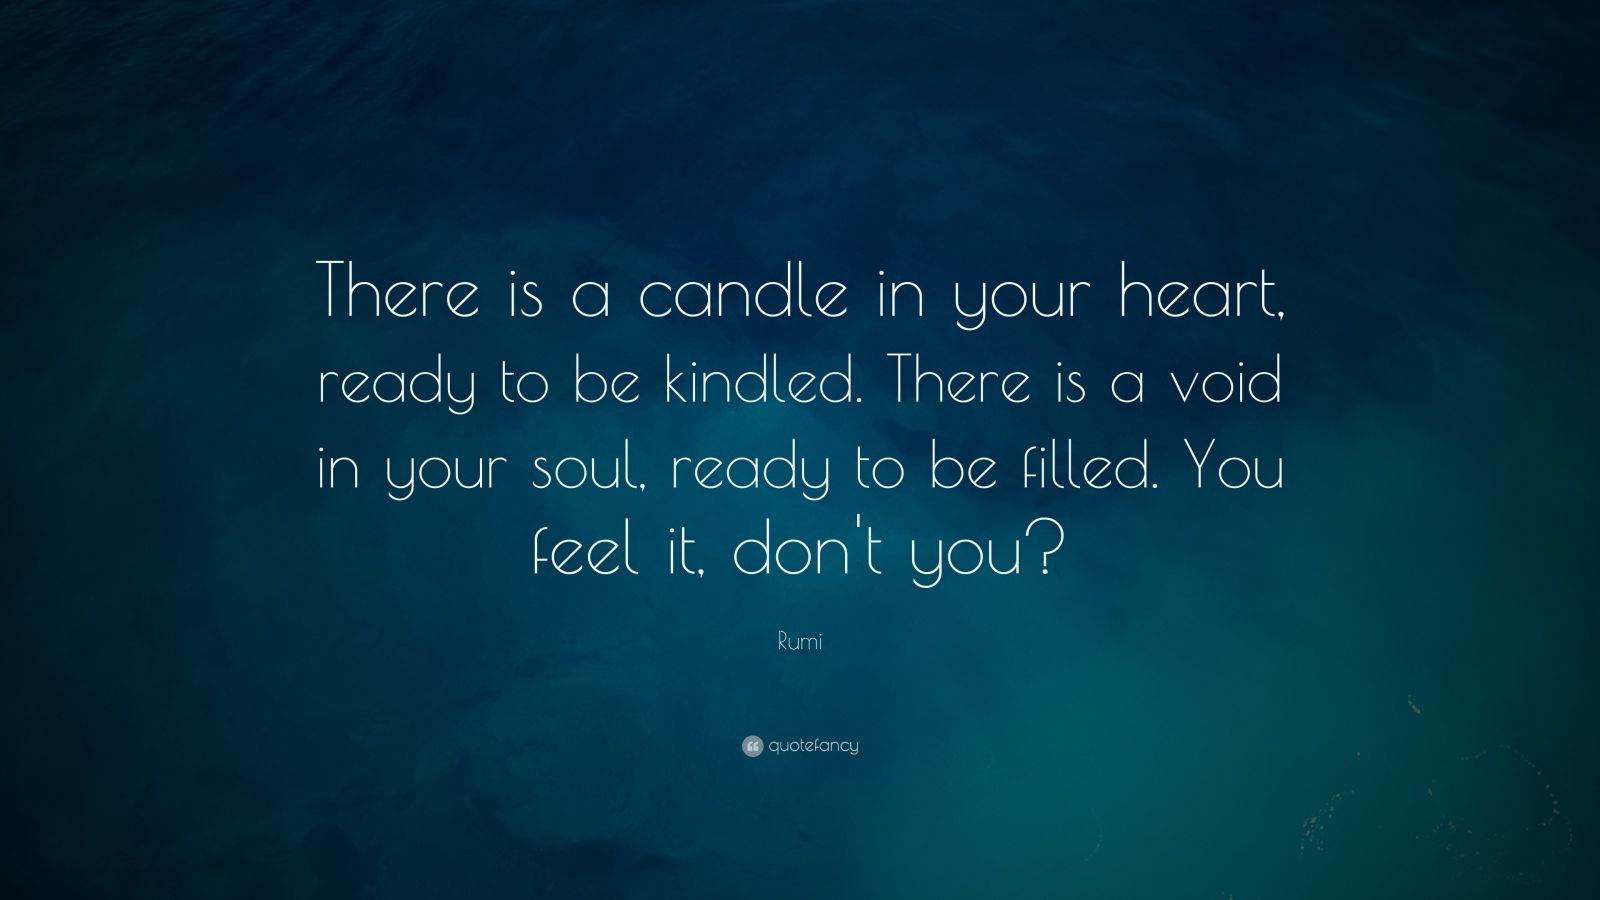 Rumi Quote “There is a candle in your heart ready to be kindled